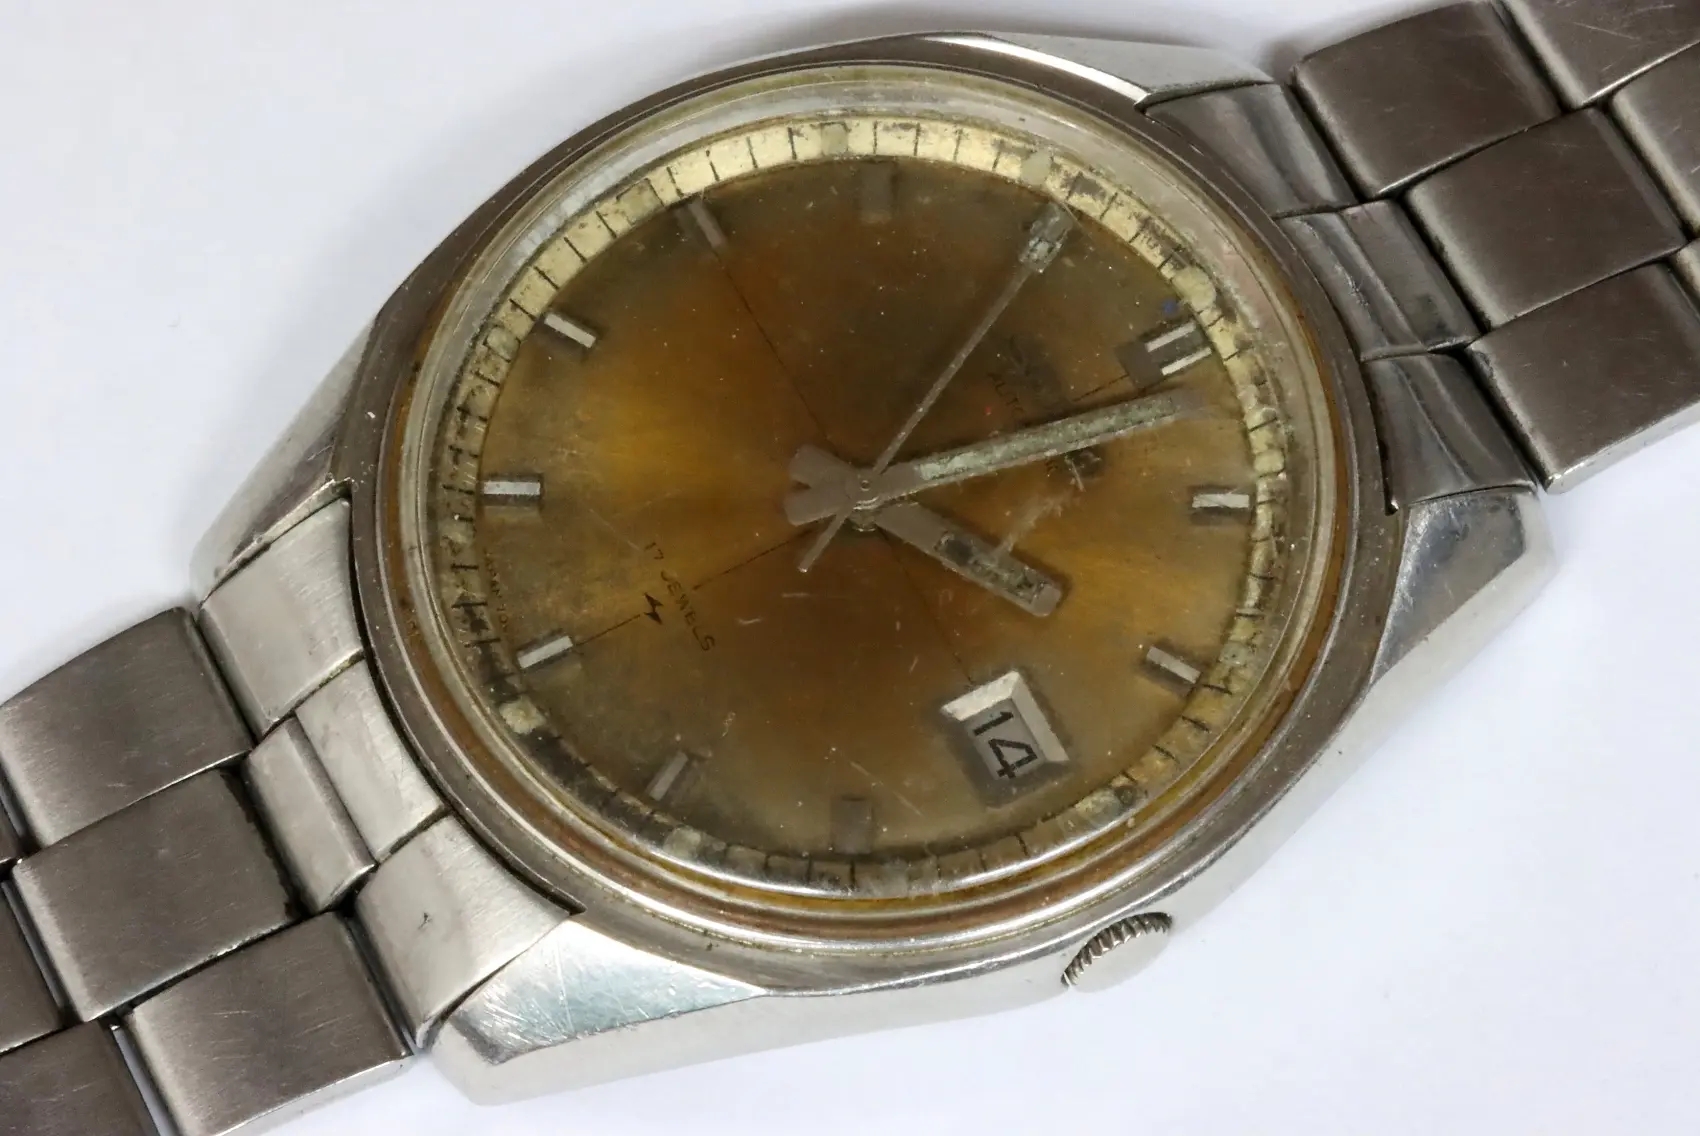 Seiko uncleaned and unrestored 7005-8060 watch